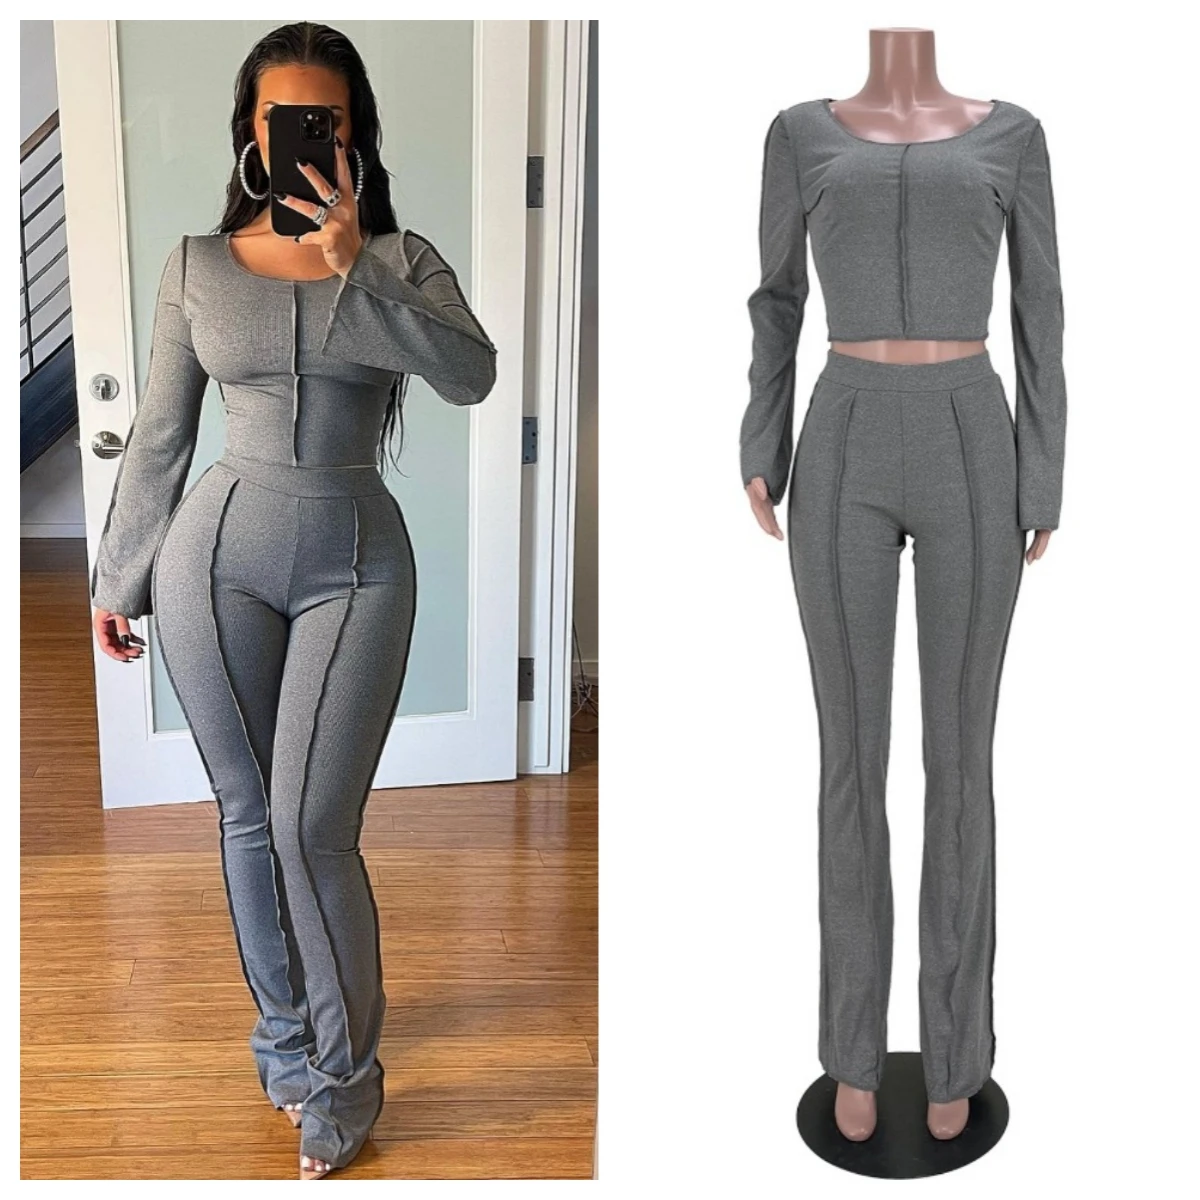 Ruffles Ribbed Solid 2 Piece Set Women O Neck Long Sleeve Crop Tops High Waist Slim Flare Pants Casual Home Suits Streetwear